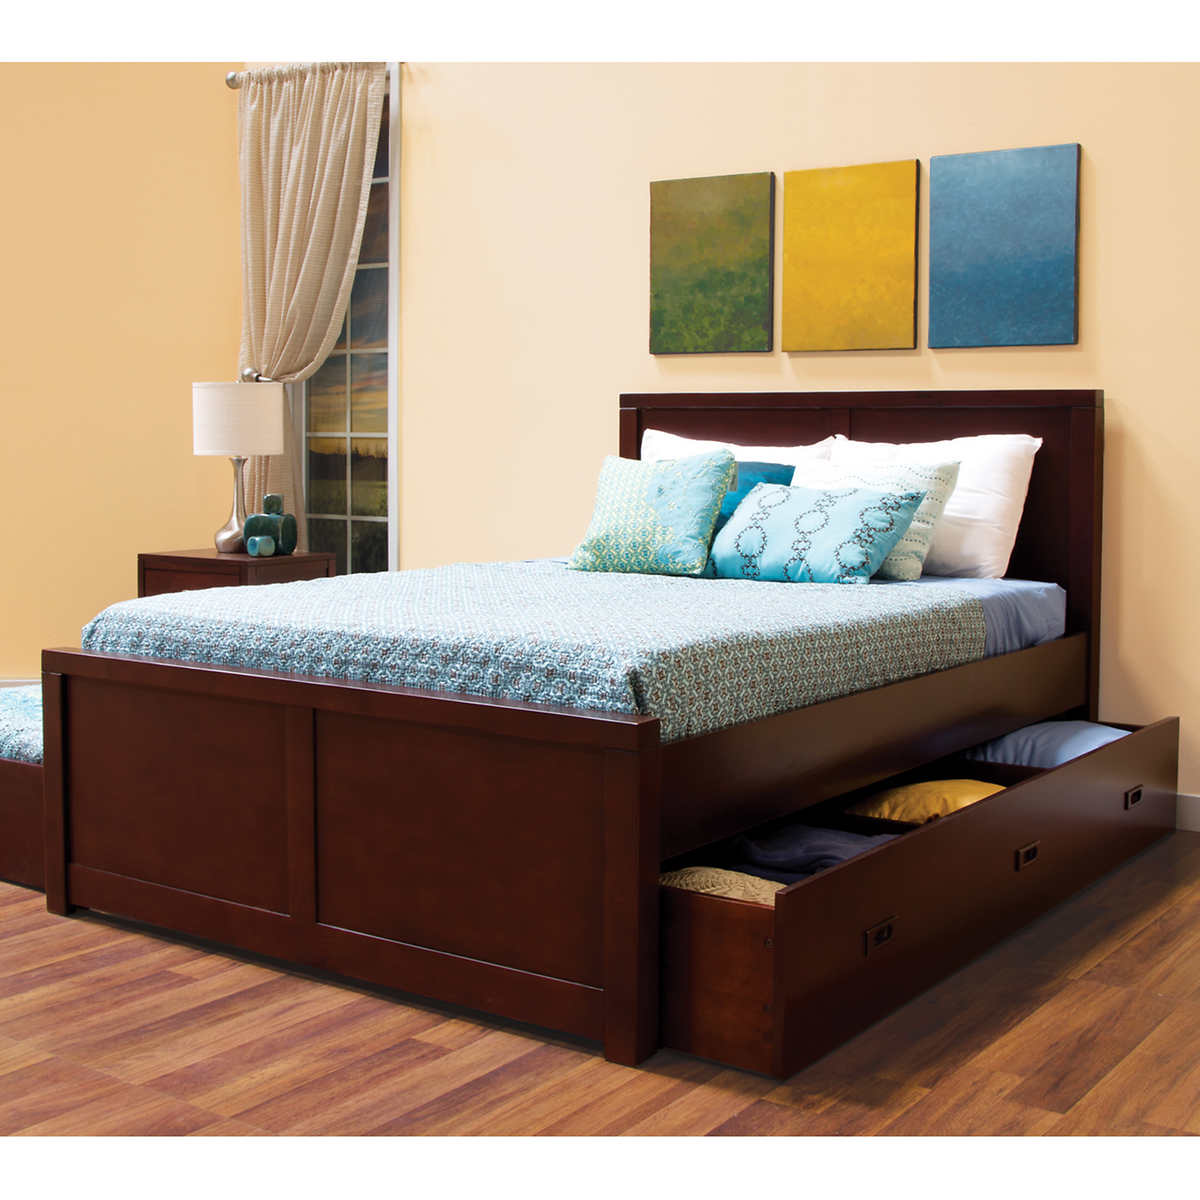 Peyton Full Bed With Trundle And, Costco King Size Bed Frame With Drawers